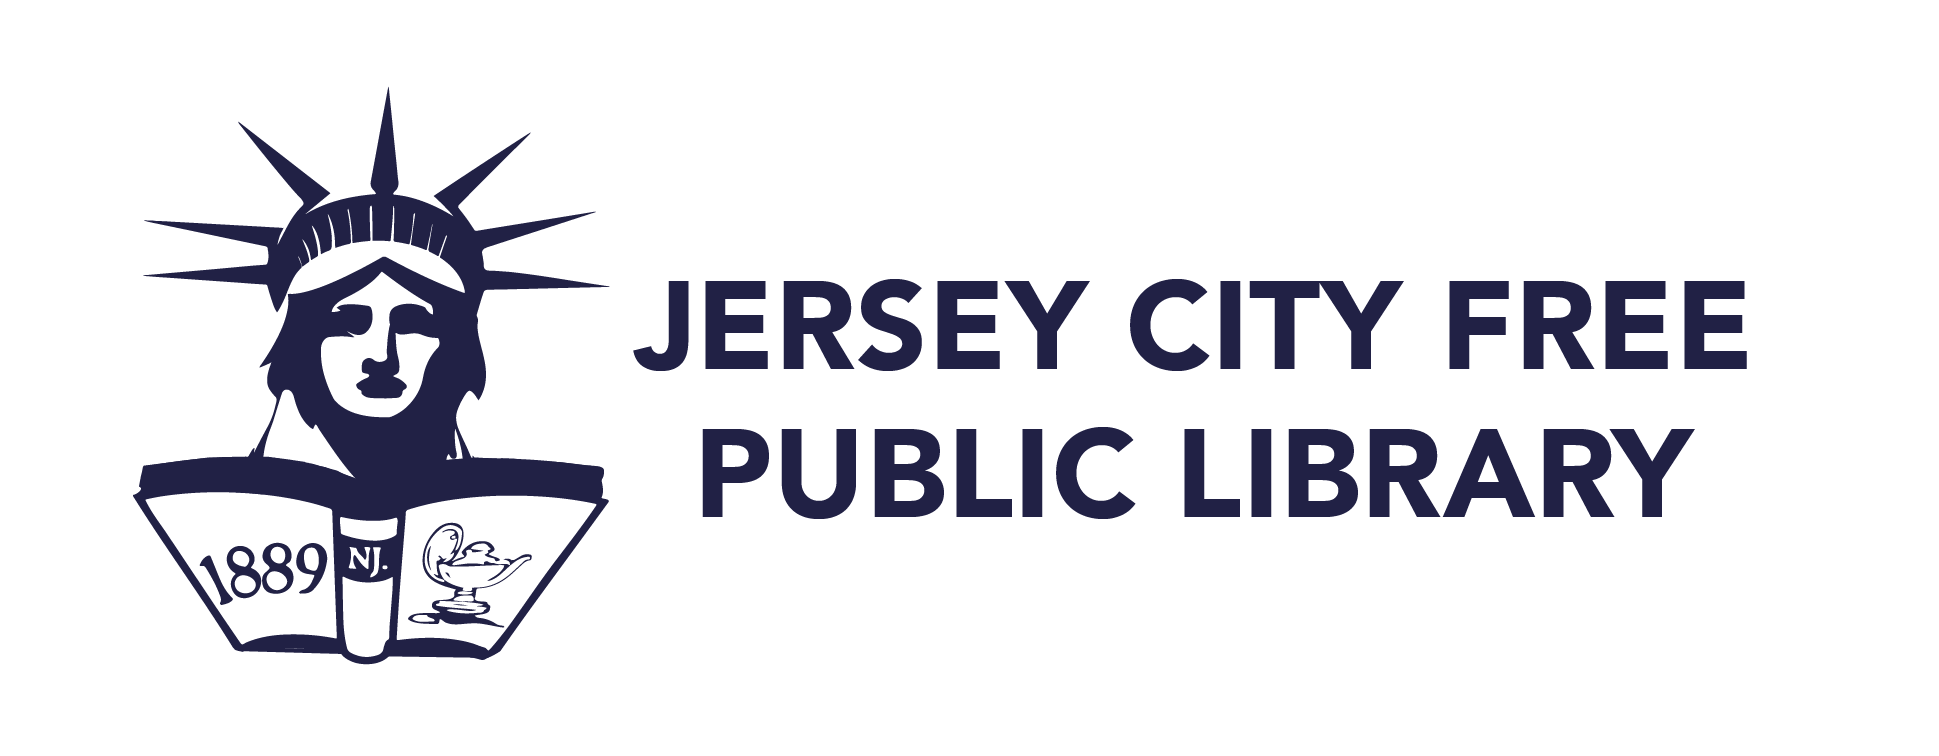 Logo that reads "Jersey City Free Public Library"